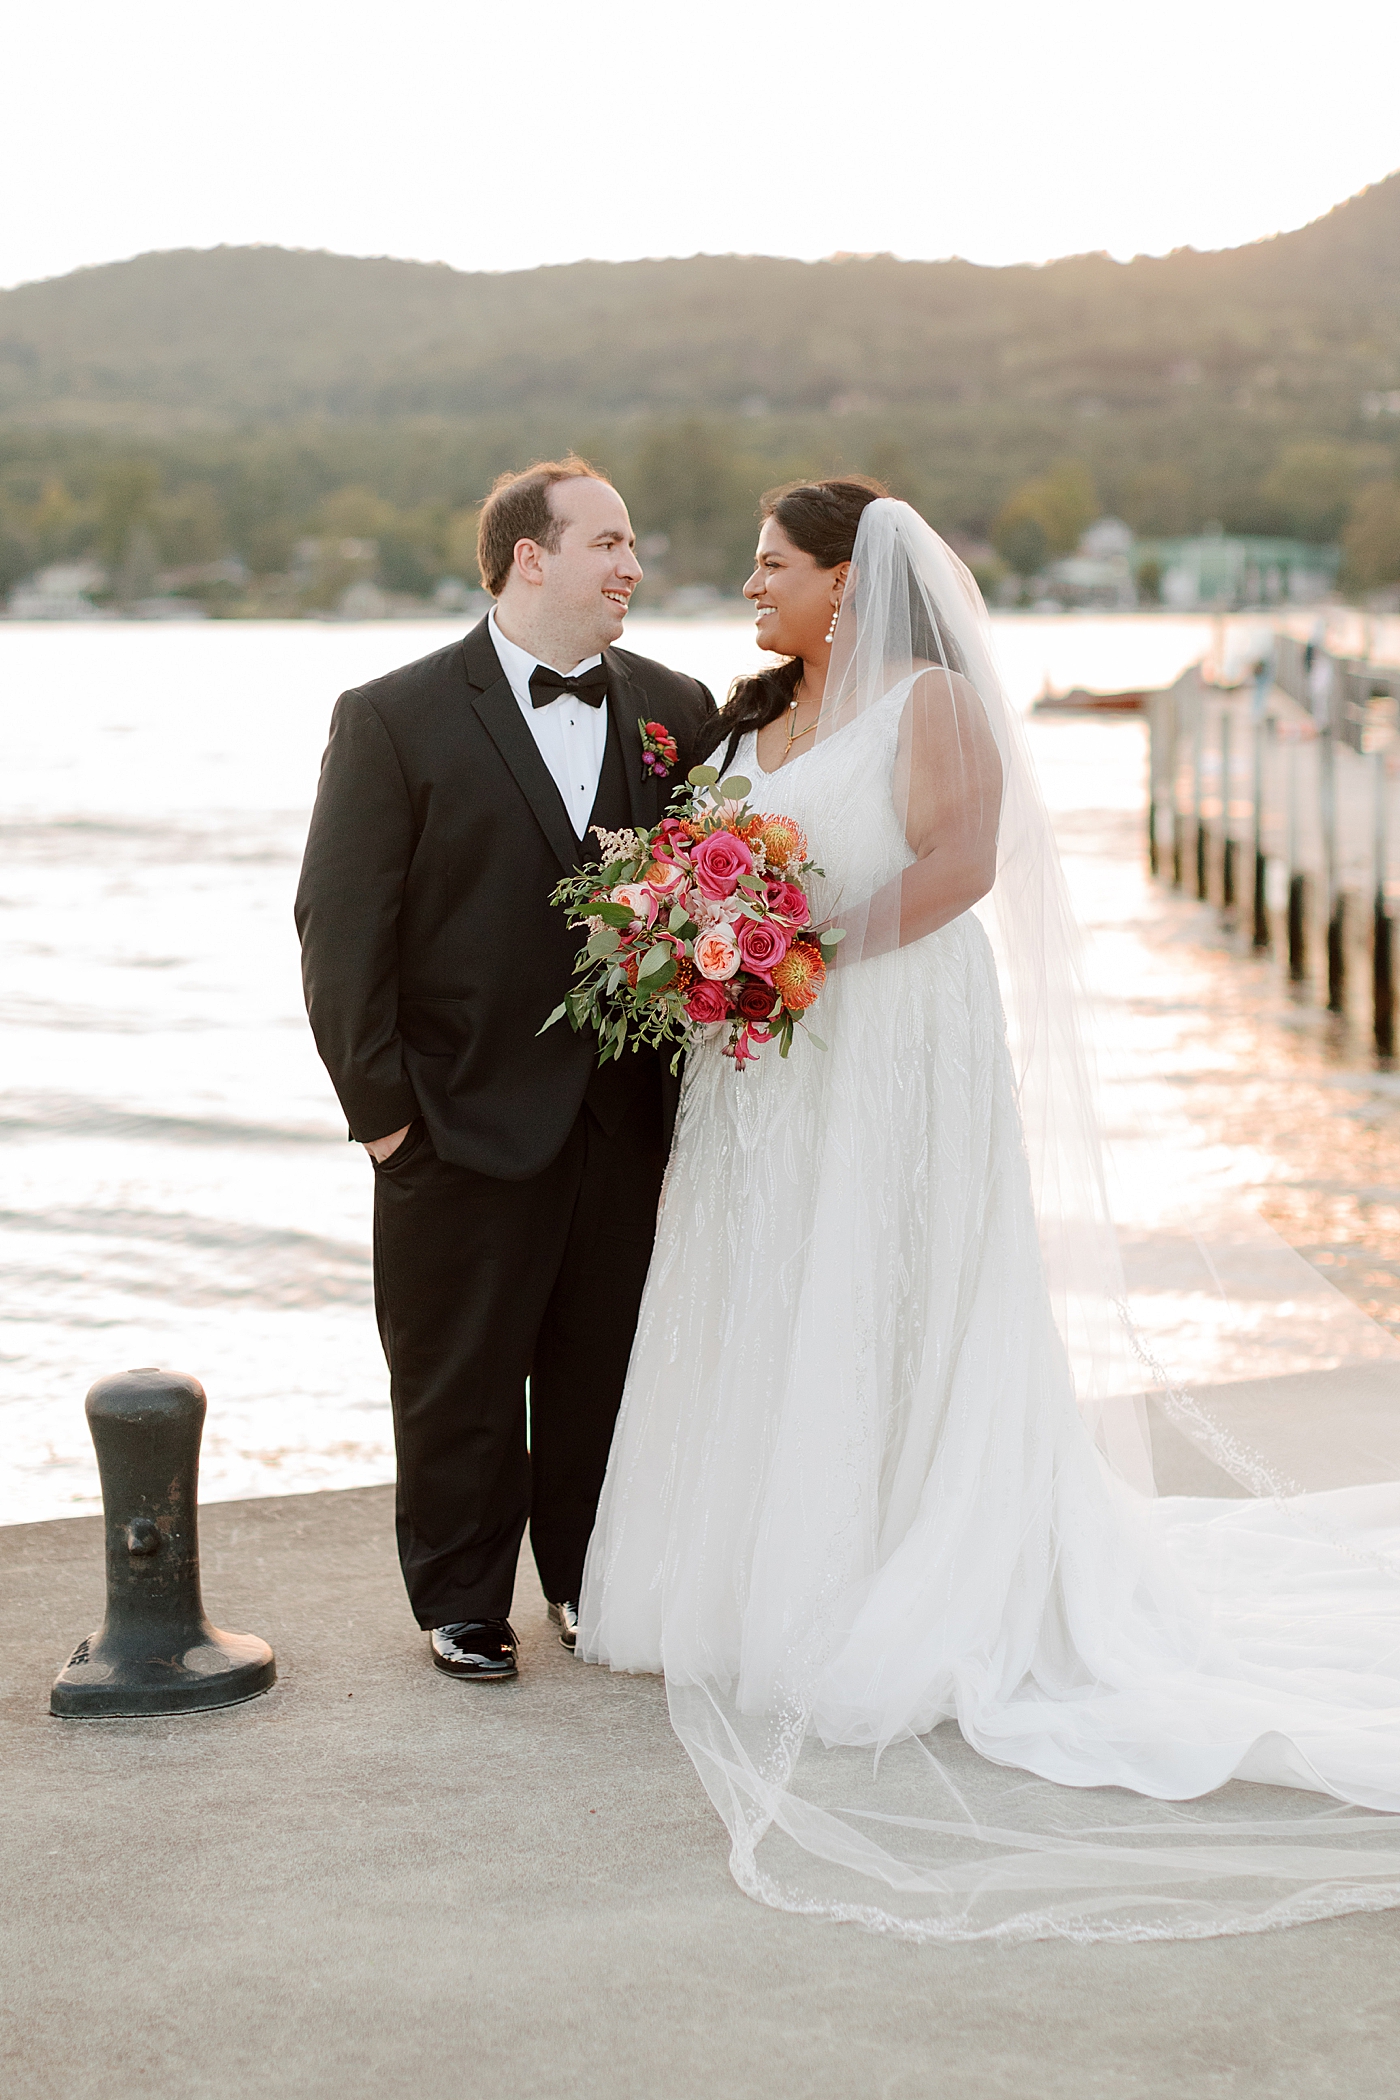 Bride and groom posing, smiling at each other on a dock at sunset | Image by Hope Helmuth Photography